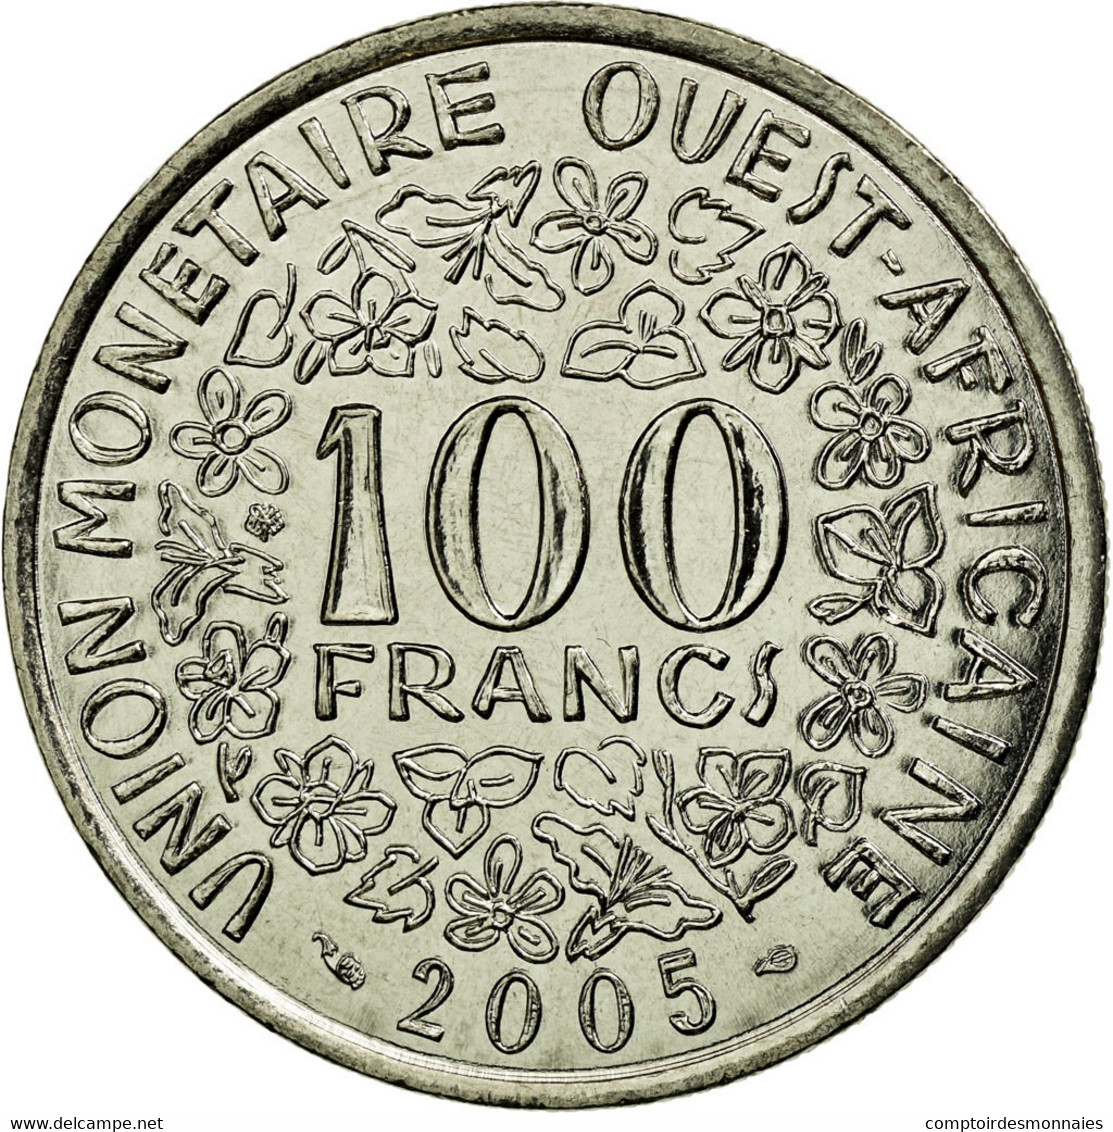 Monnaie, West African States, 100 Francs, 2005, SUP, Nickel, KM:4 - Costa De Marfil